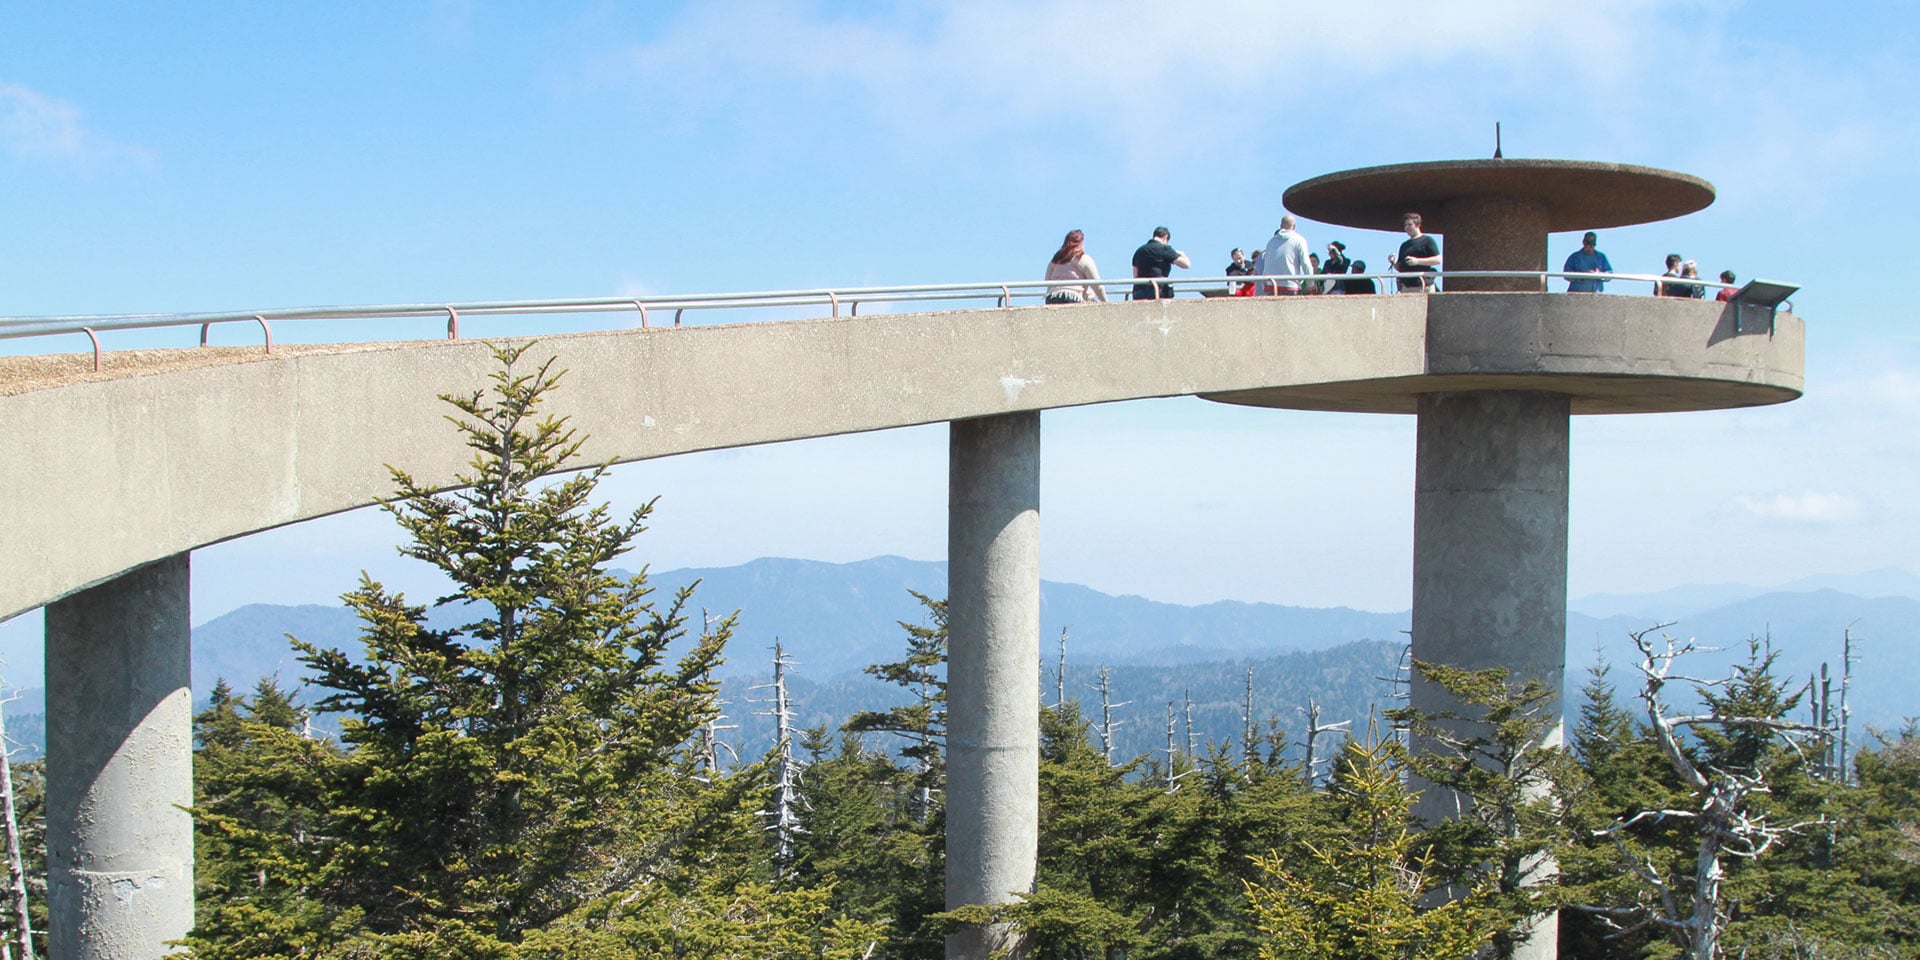 Places to visit in the Smoky Mountains: Clingman’s Dome.